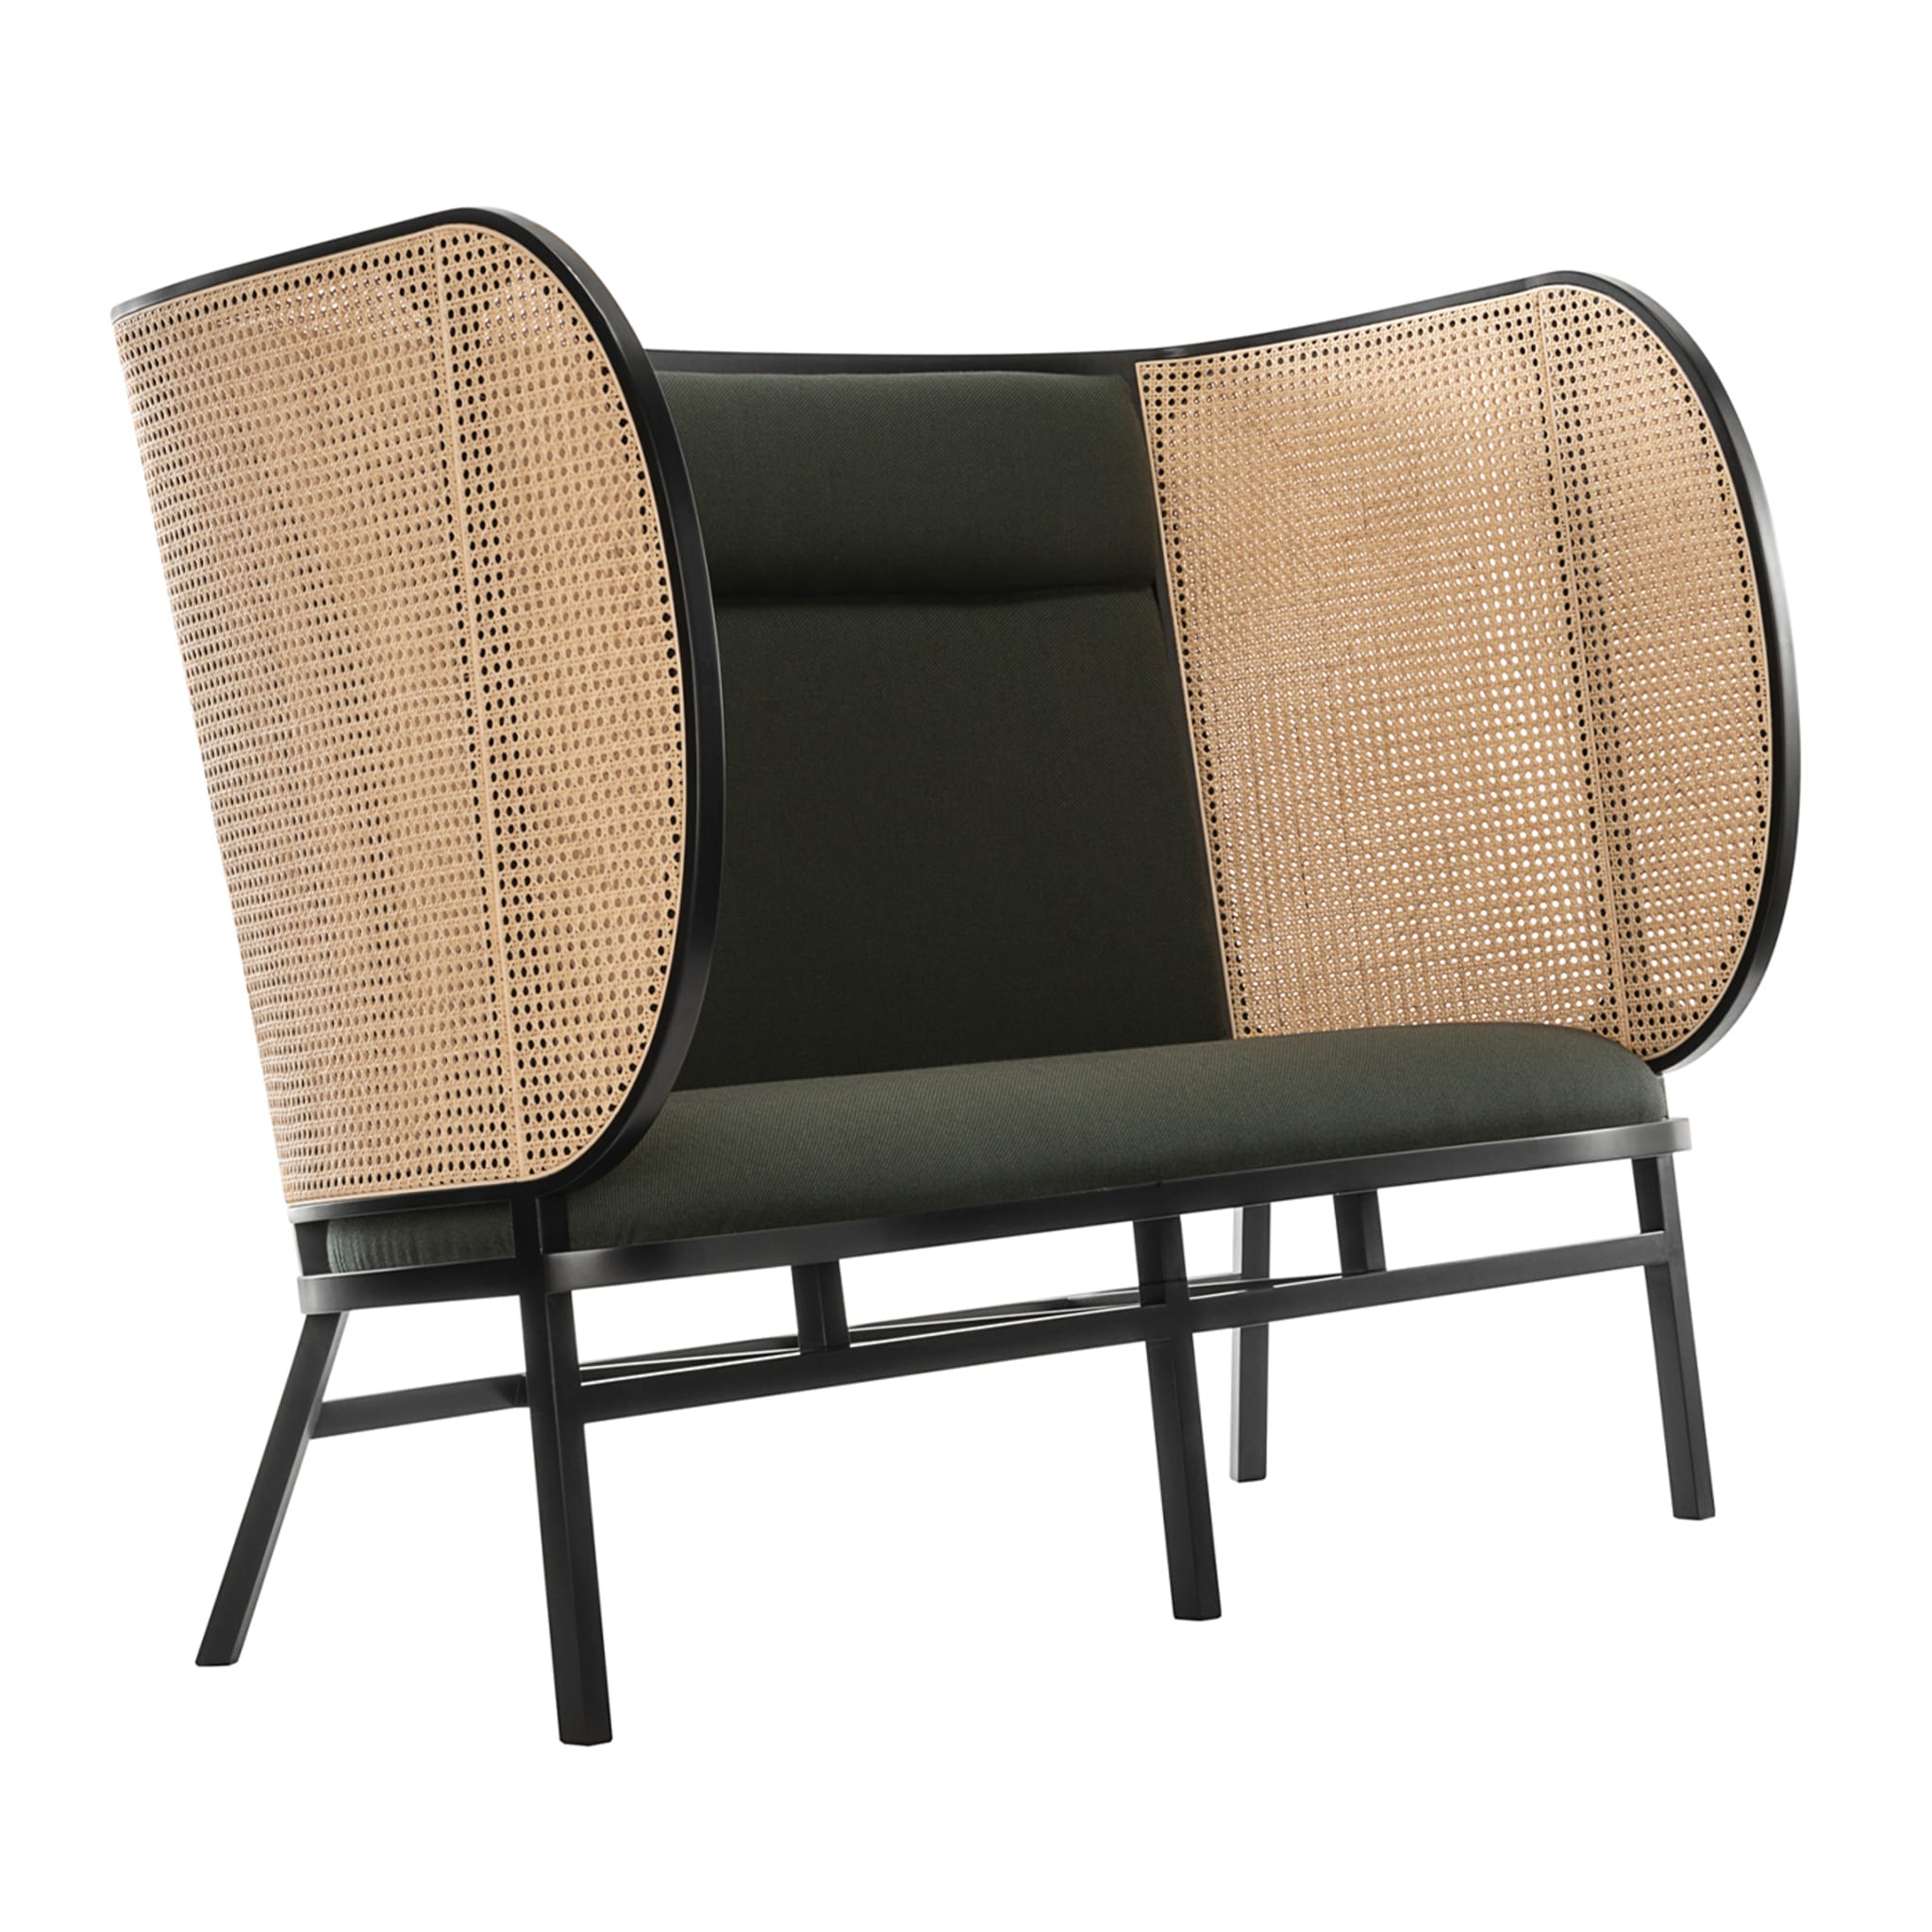 Hideout Loveseat by Front - Alternative view 1